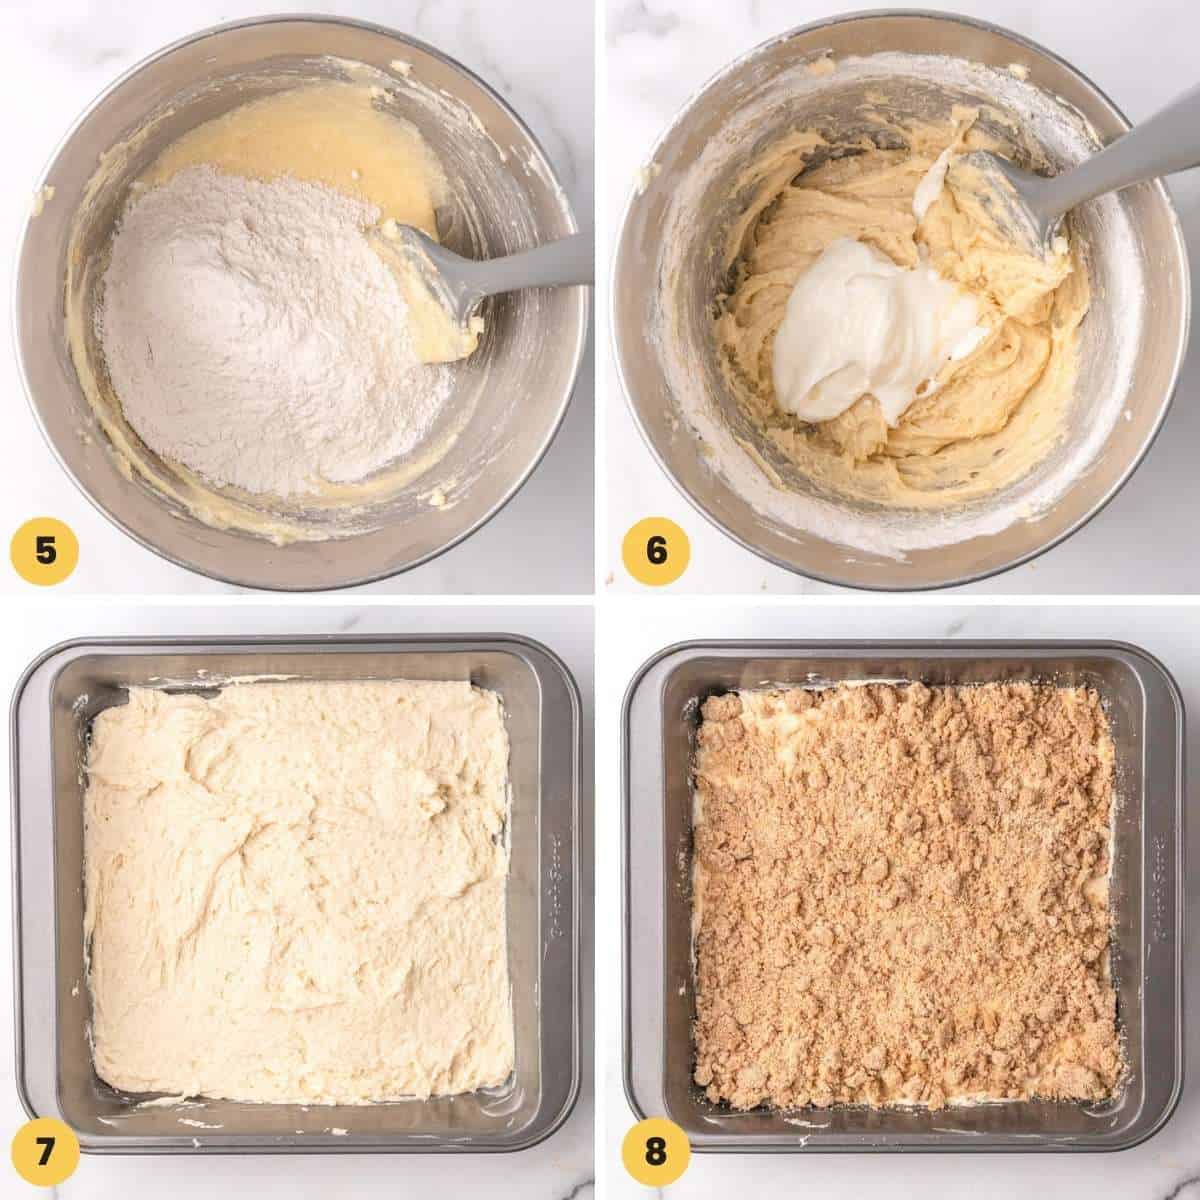 Four photos showing how to layer the batter with streusel to make coffee cake.